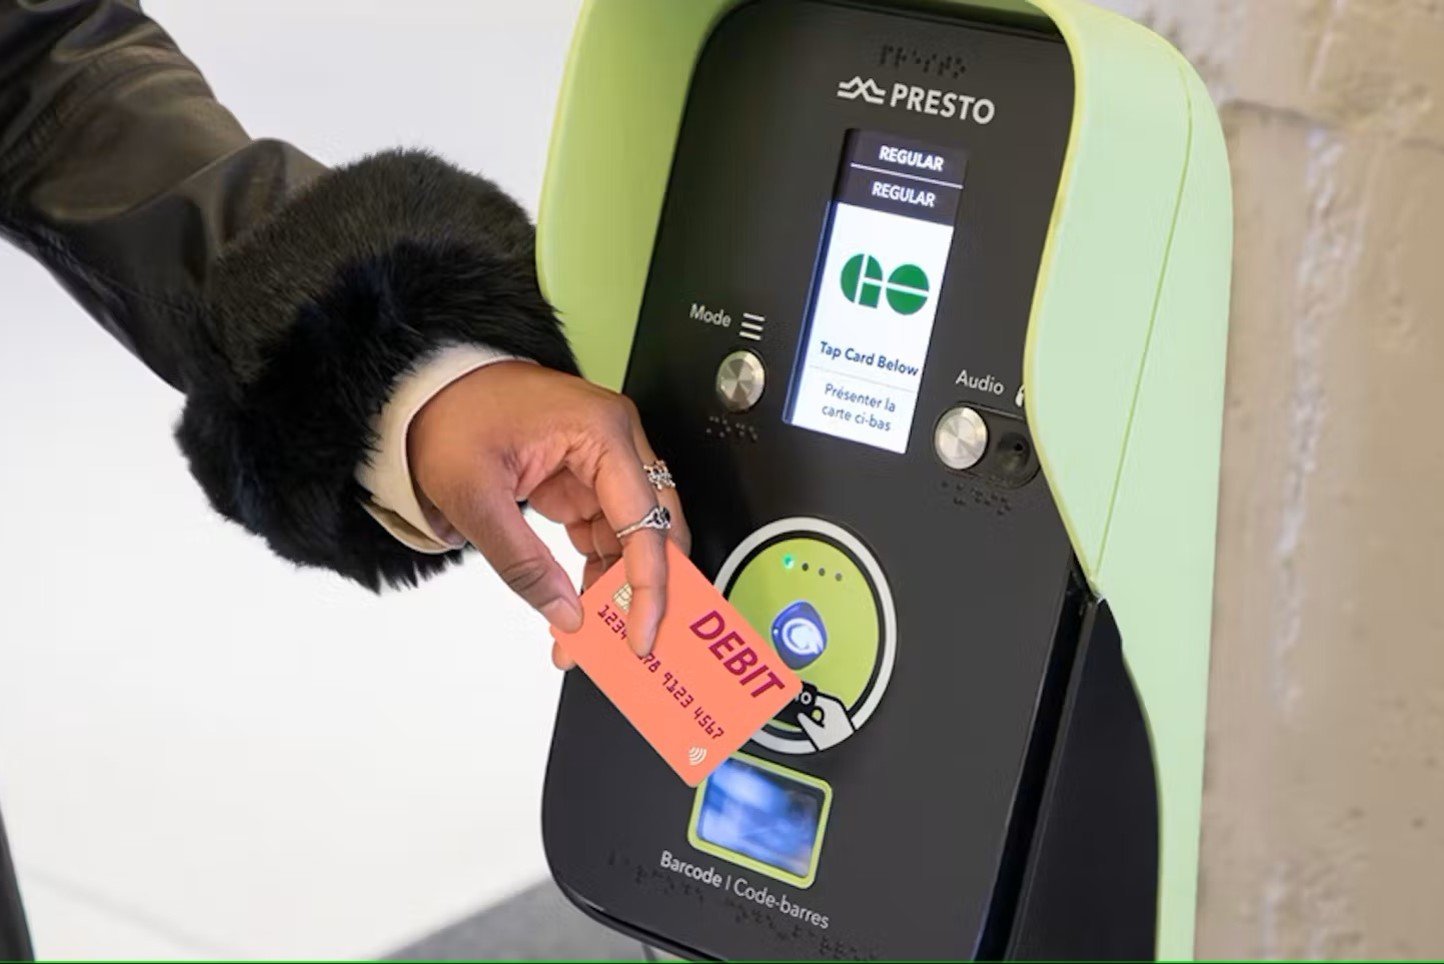 As of May 2, nine transit systems in the Toronto region equipped with PRESTO devices will allow debit cards to be tapped to pay for transit fare. Metrolinx and the government of Ontario are working with TTC to roll out the program to its network this summer. As of May 2, nine transit systems in the Toronto region equipped with PRESTO devices will allow debit cards to be tapped to pay for transit fare. Metrolinx and the government of Ontario are working with TTC to roll out the program to its network this summer.